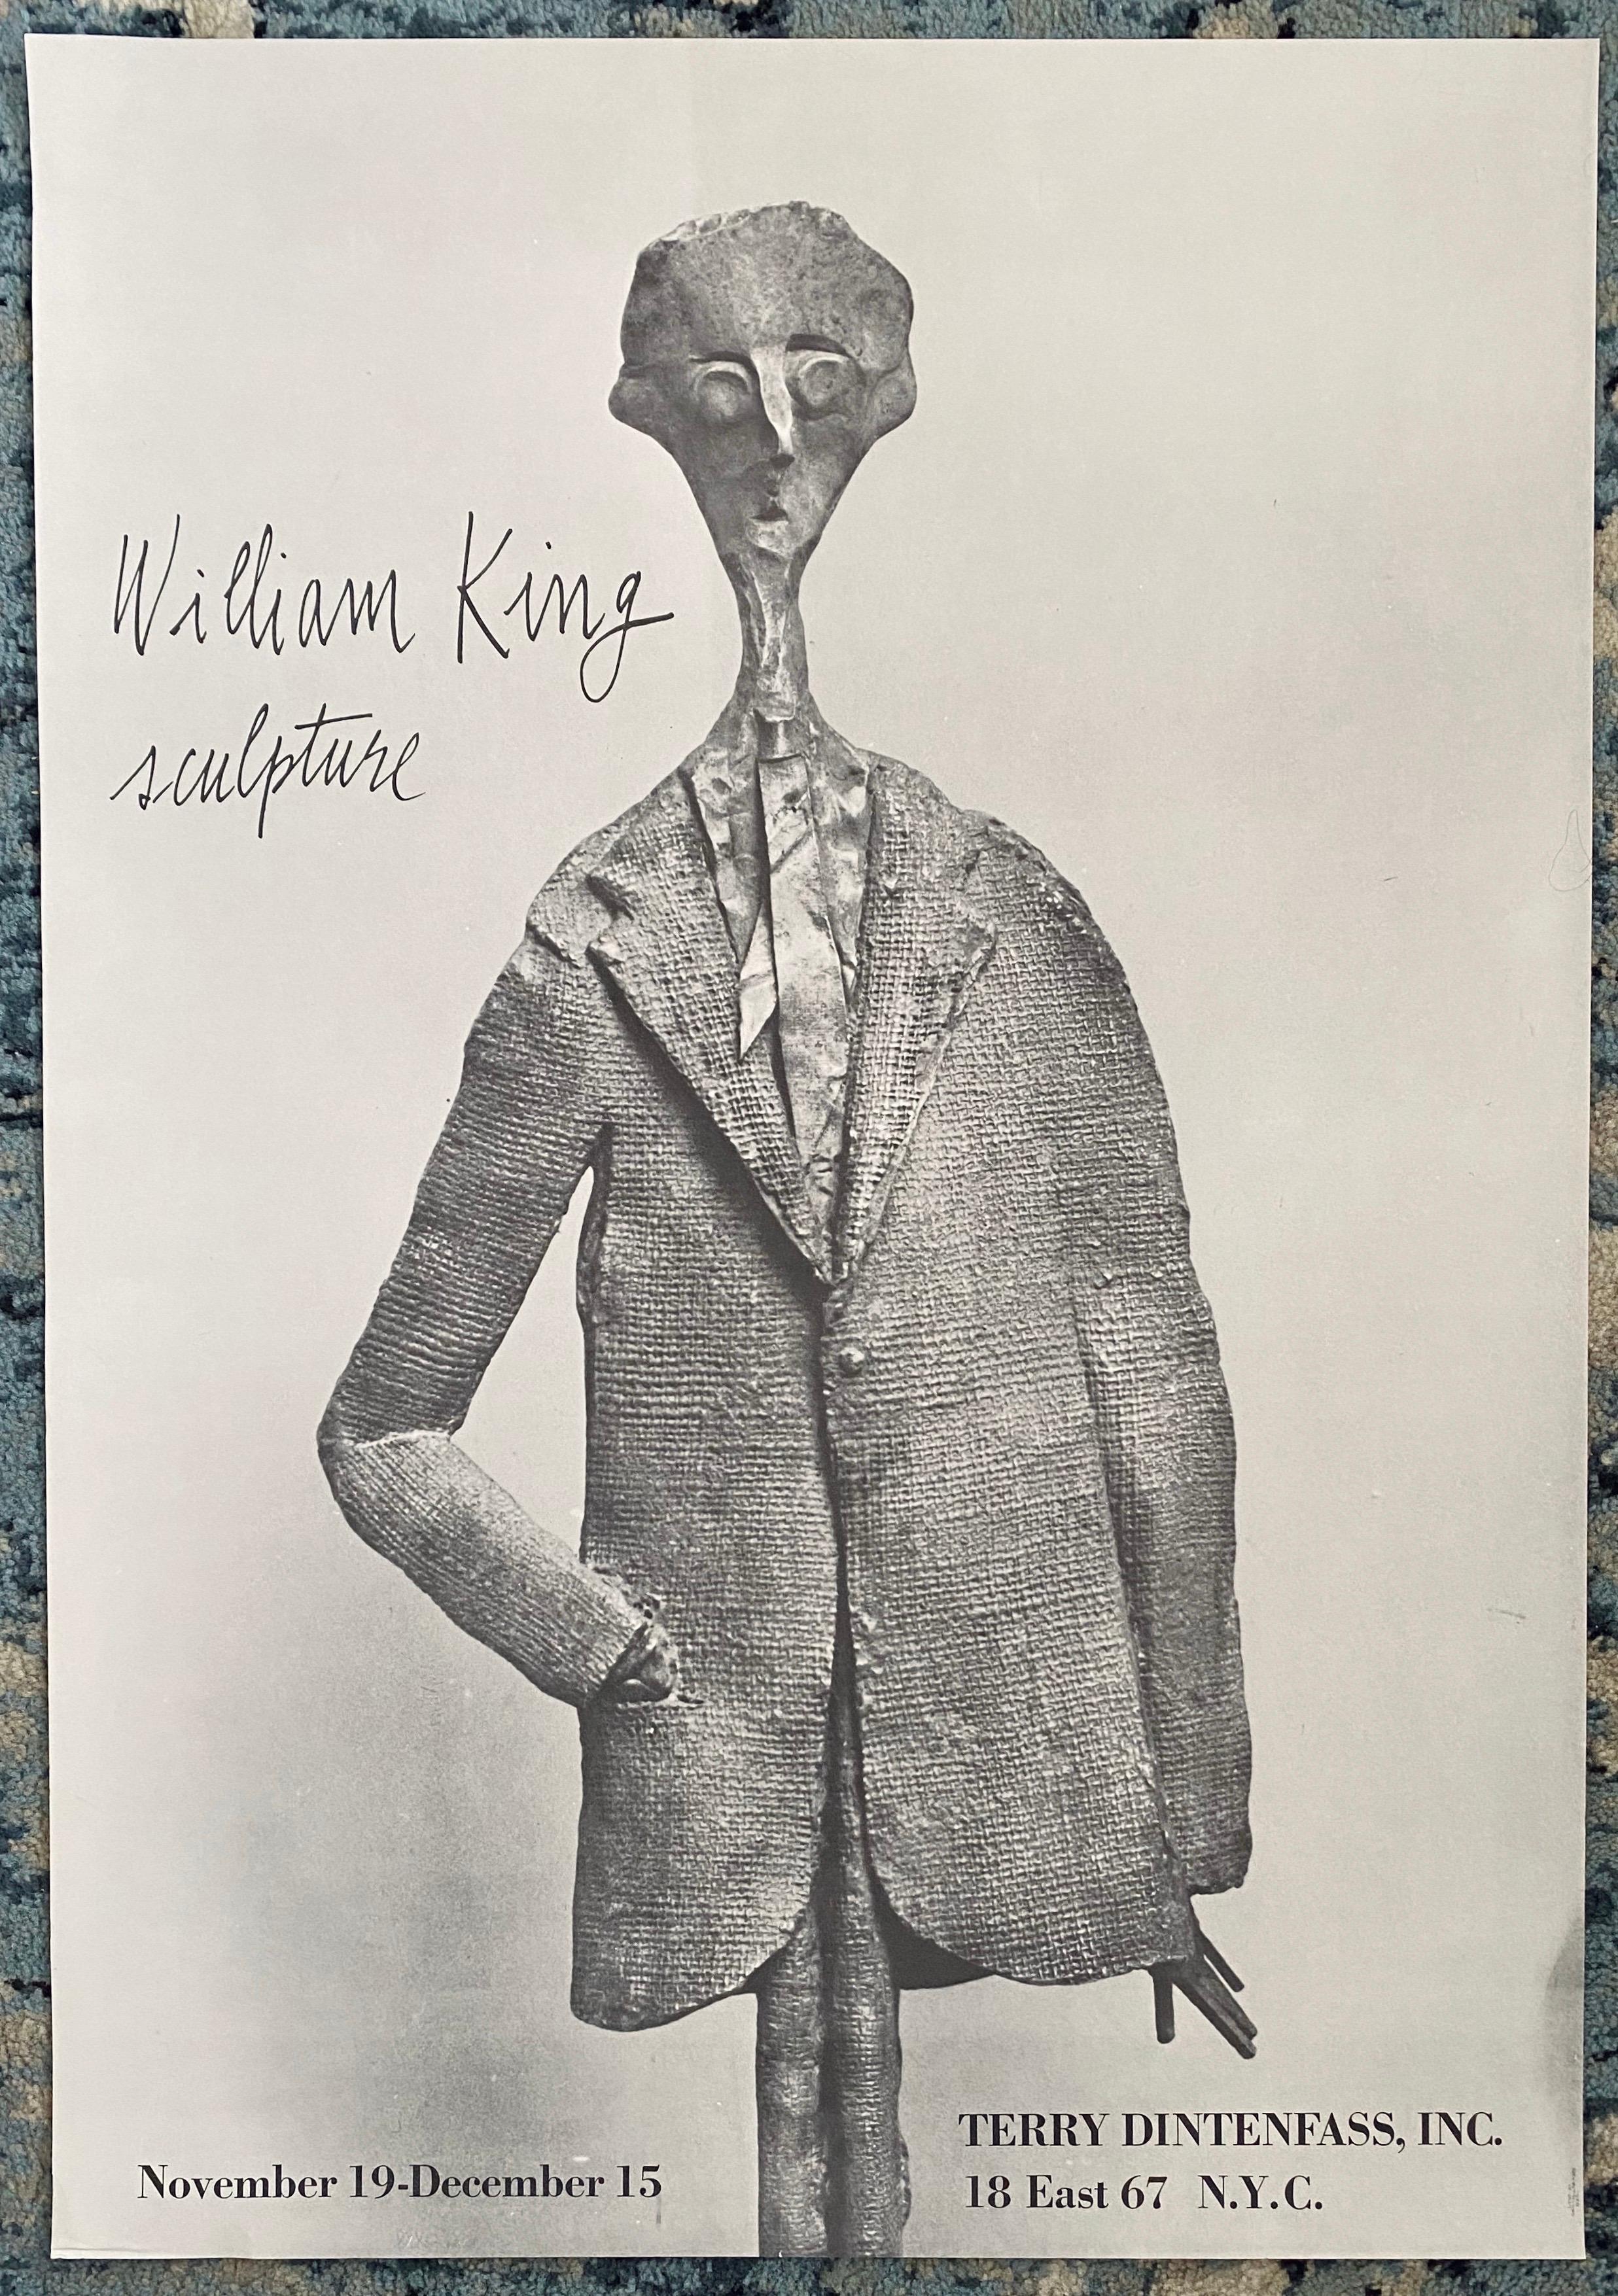 Sculptor William King is widely renowned for his signature flattened and stilt-legged figures, gesturing dramatically. Humorous and rife with social commentary, his work first offered an alternative to Abstract Expressionism in the 1950s, then to